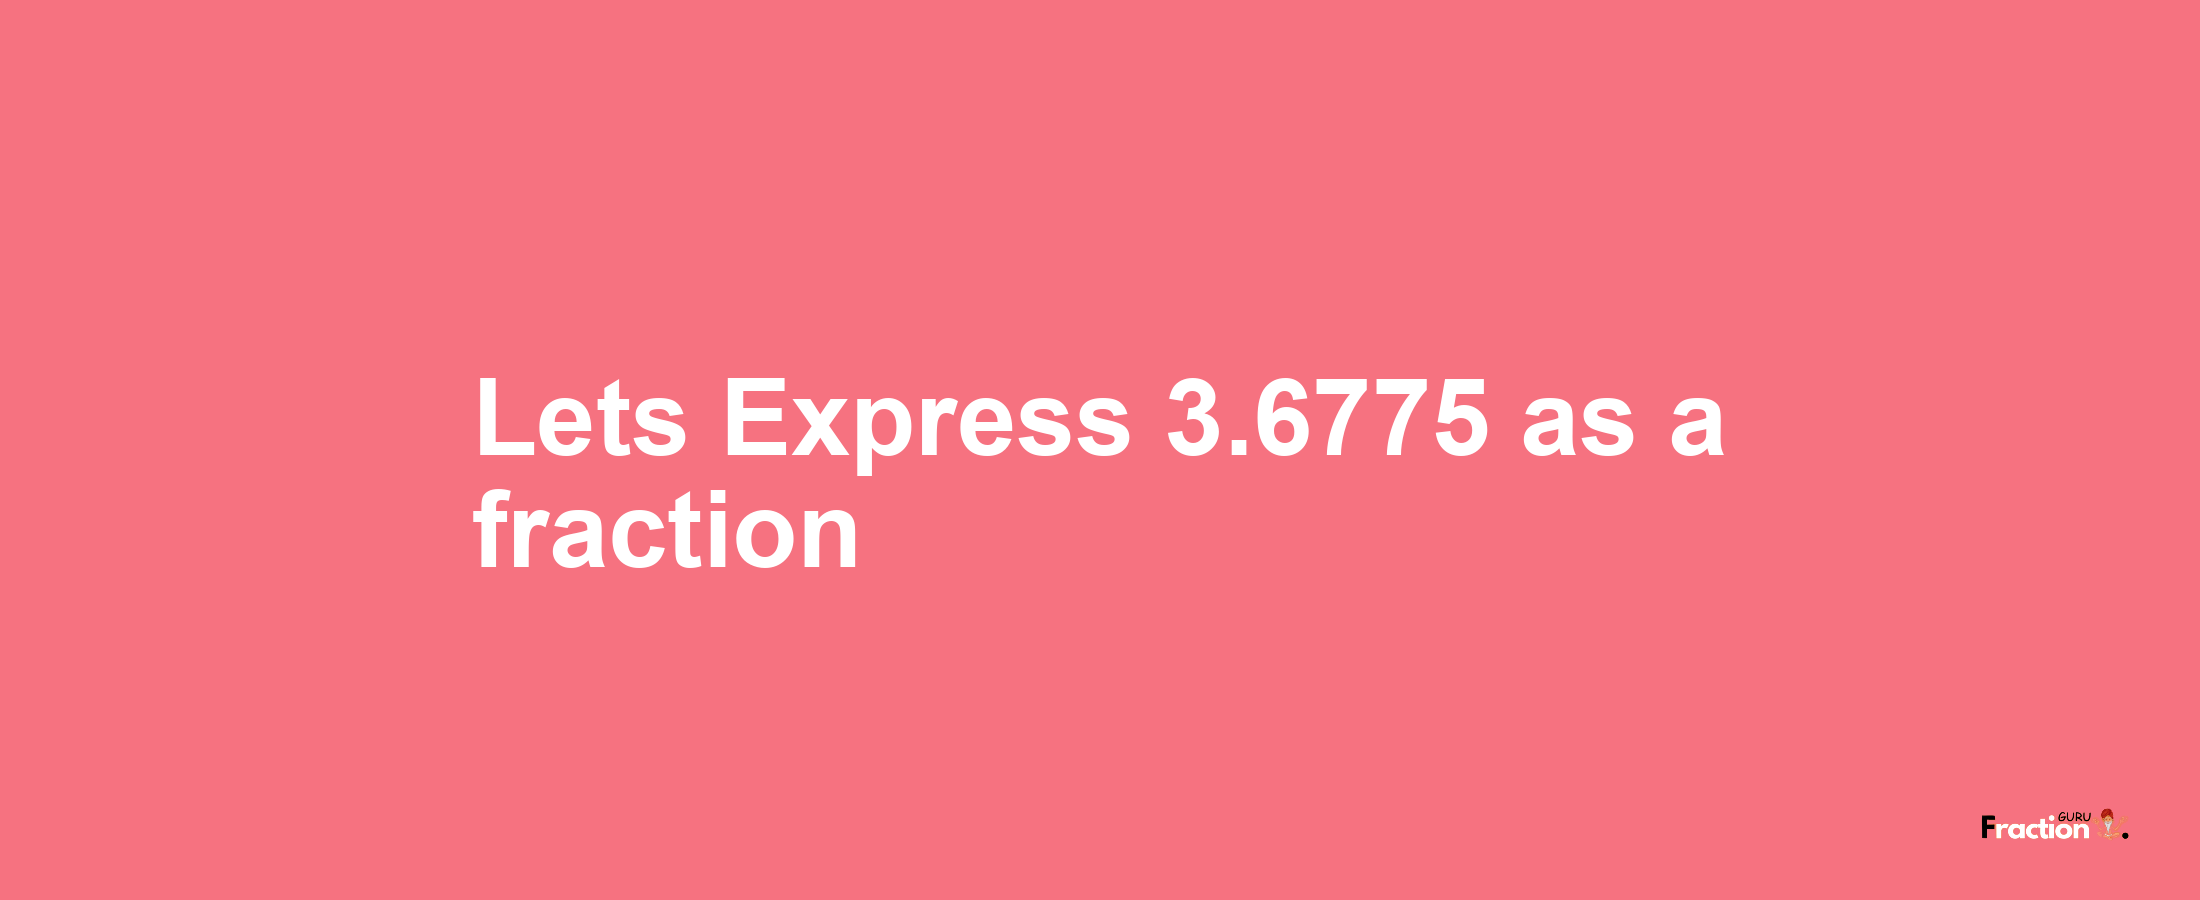 Lets Express 3.6775 as afraction